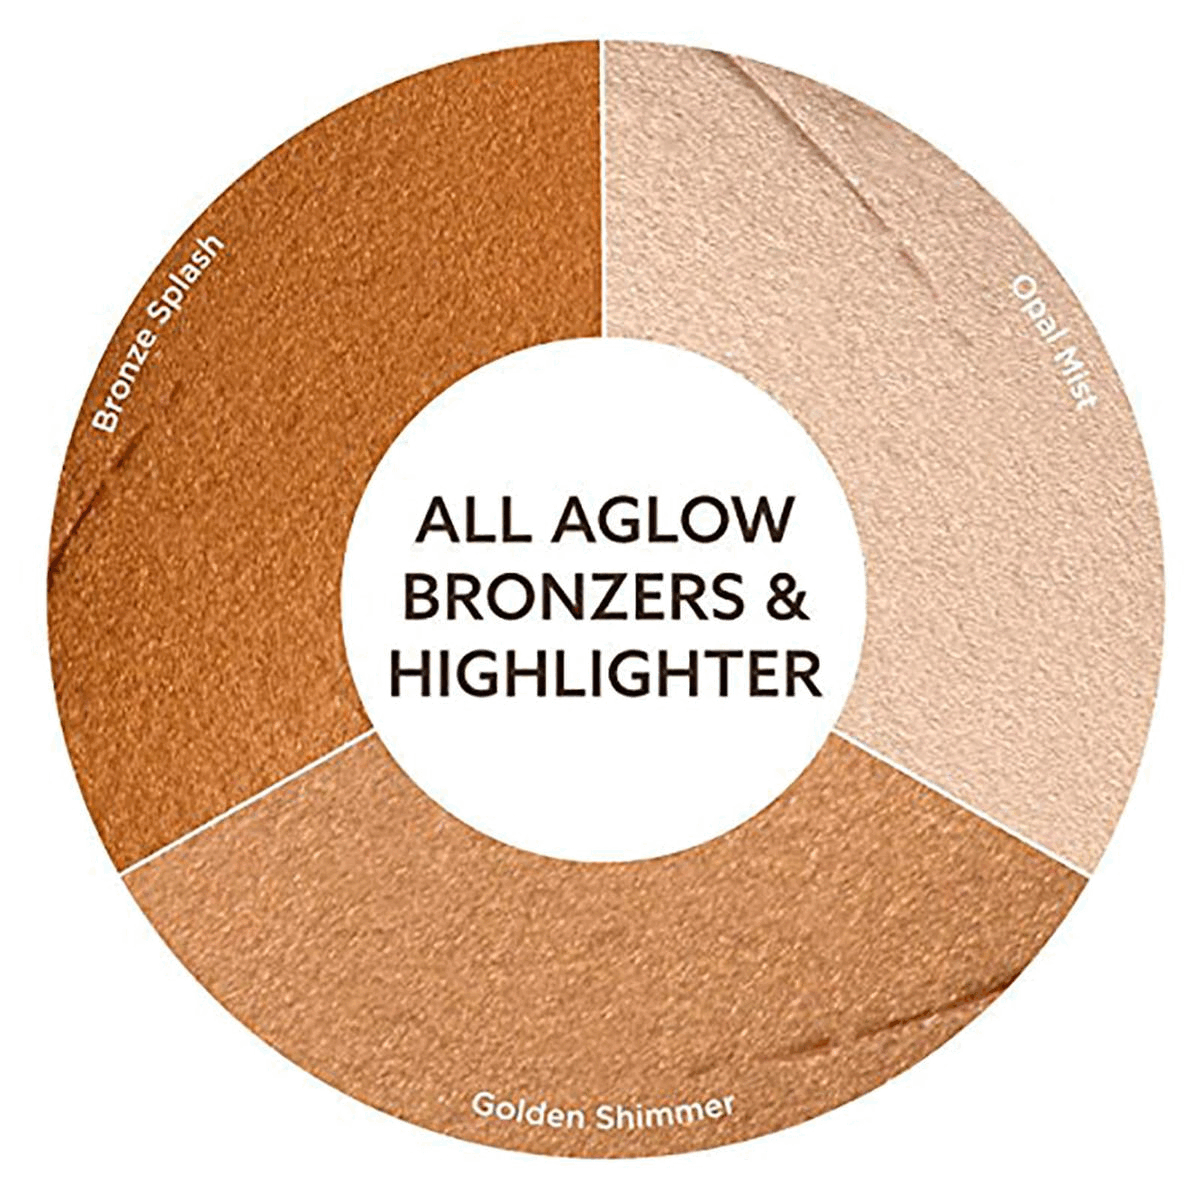 
            All aglow bronzers and highlighter,
            made with natural ingredients to enhance your natural glow,
            coconut oil, jojoba seed oil,
            daikon radish extract,
            KIND TO SKIN & PLANET SINCE 1984 
            Ingredients From Nature 
            Leaping Bunny Certified 
            Landfill-free Operations 
            oiA 
            Responsible Sourcing 
            Recyclable Packaging 
            